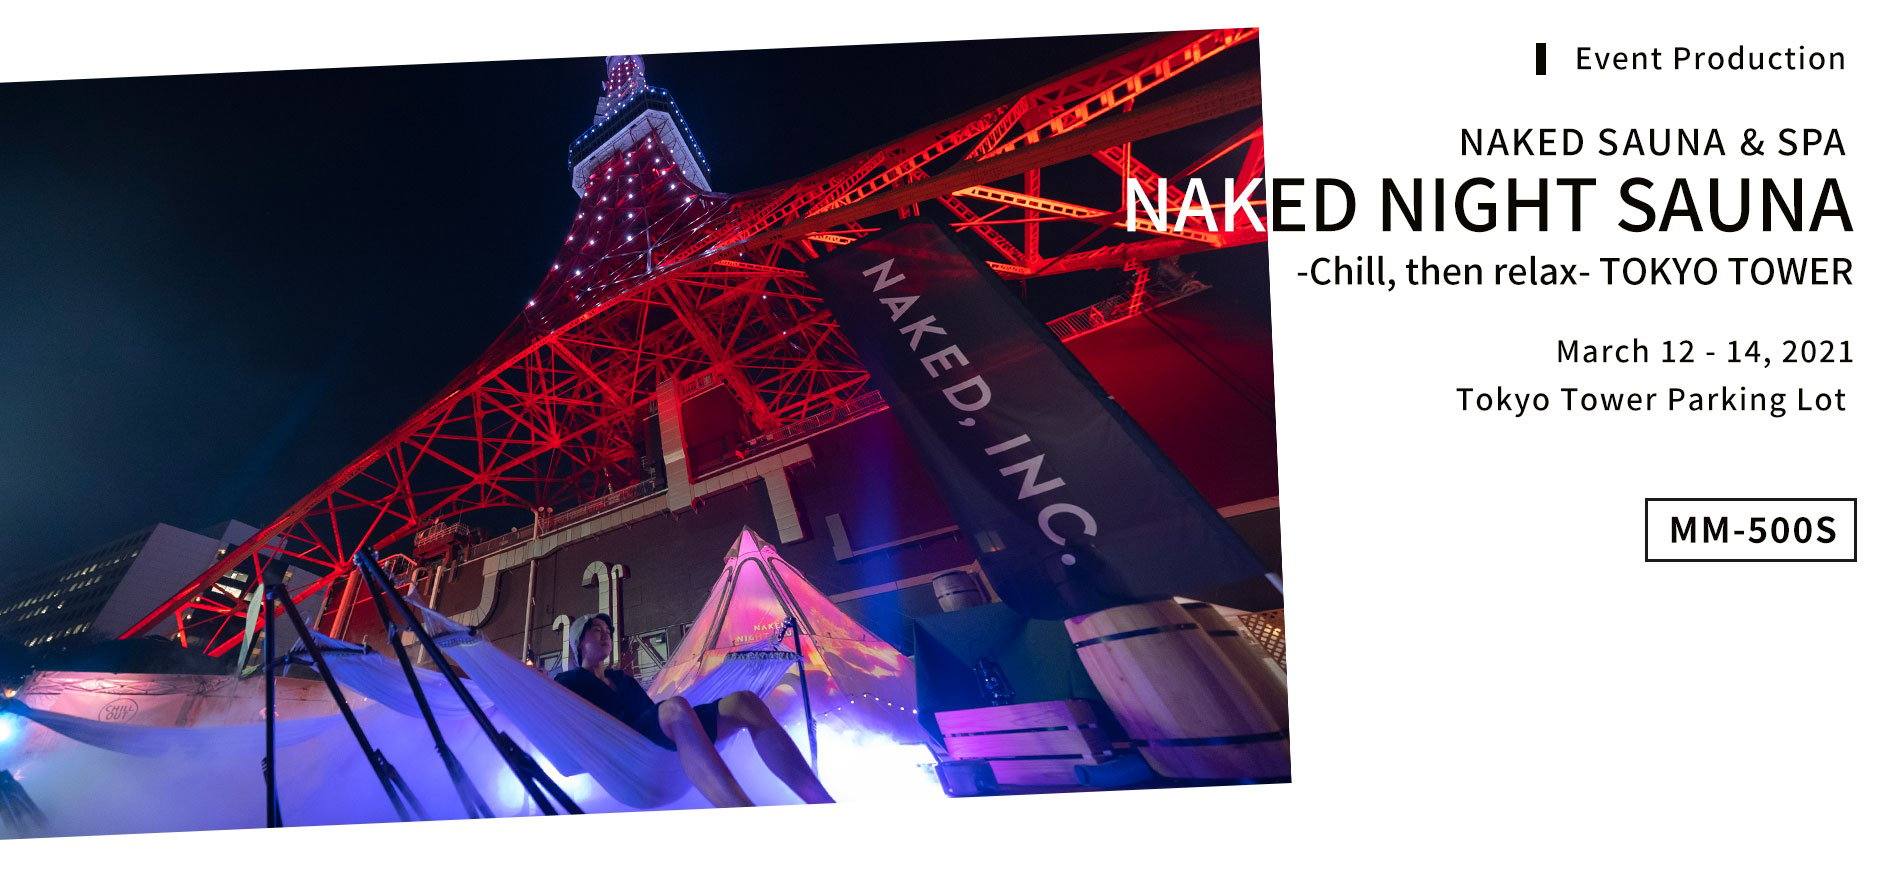 NAKED SAUNA & SPA　NAKED NIGHT SAUNA　-Chill, then relax- TOKYO TOWER